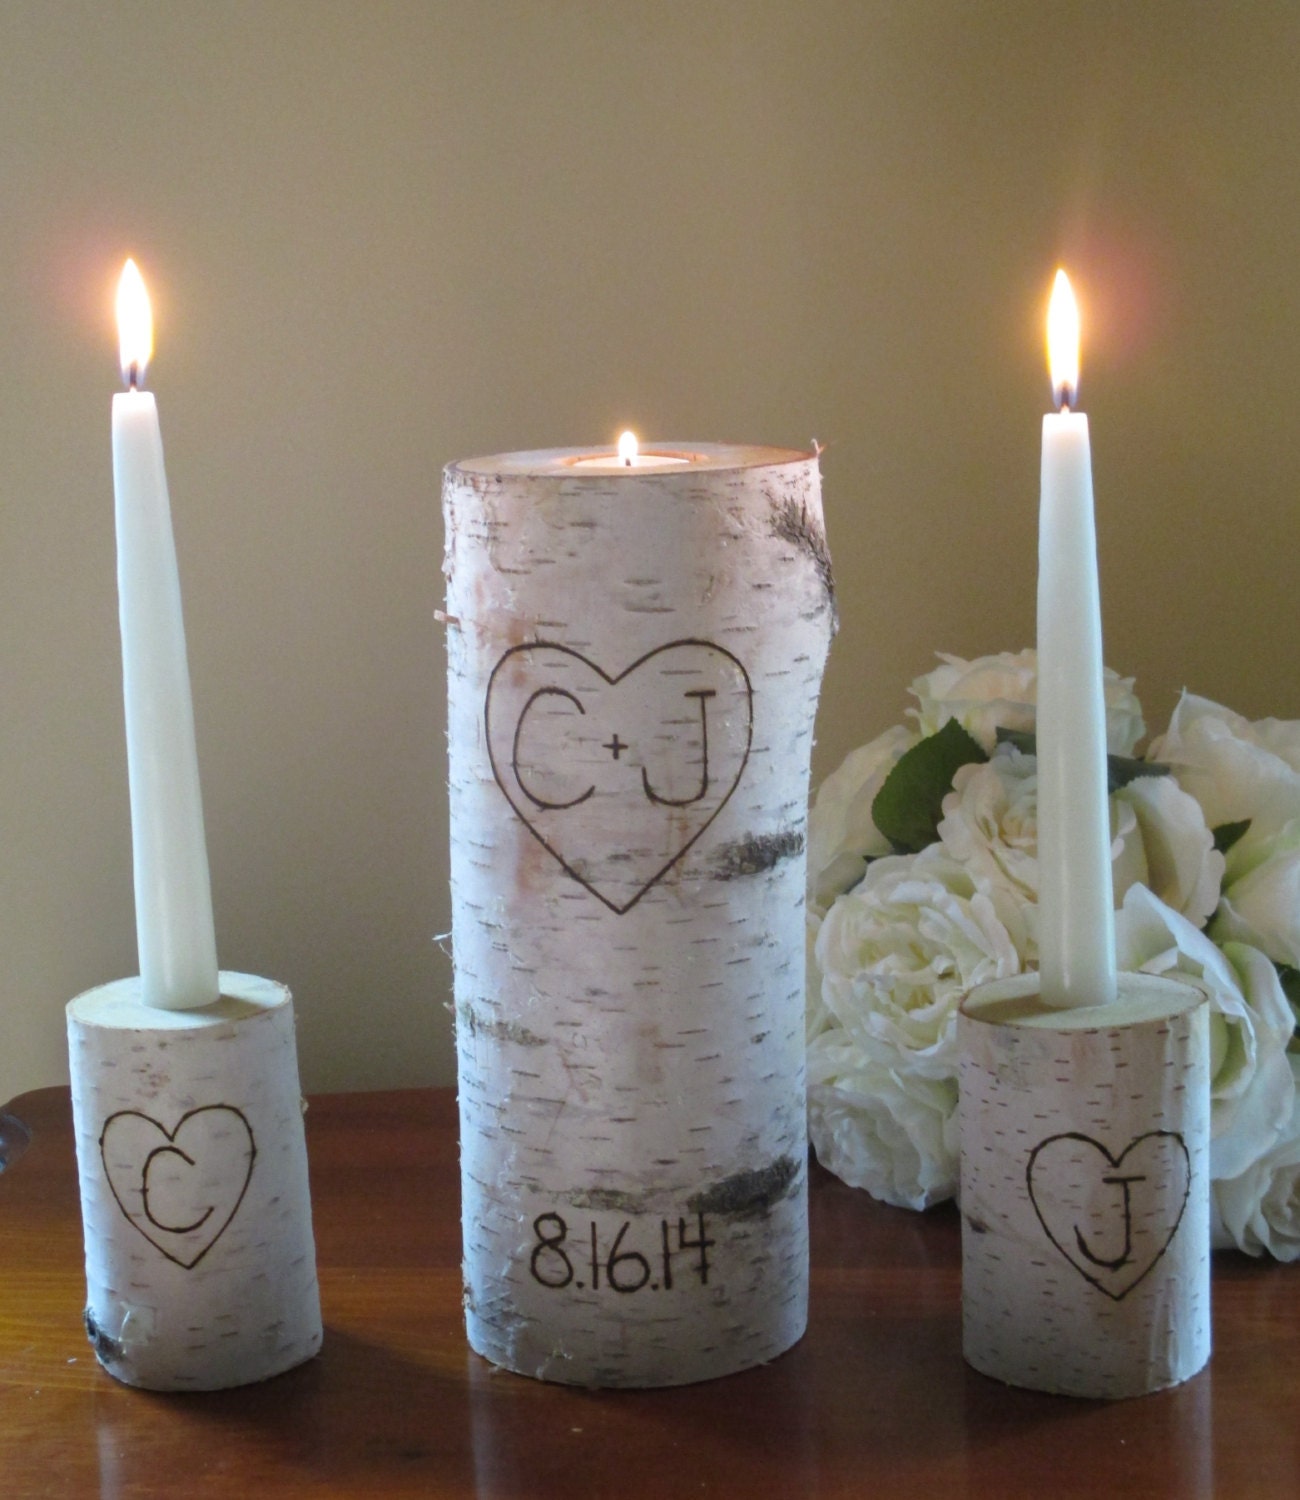 Personalized Birch Bark Unity Candle with Two Birch Candle Holders Rustic Wedding Date Centerpiece